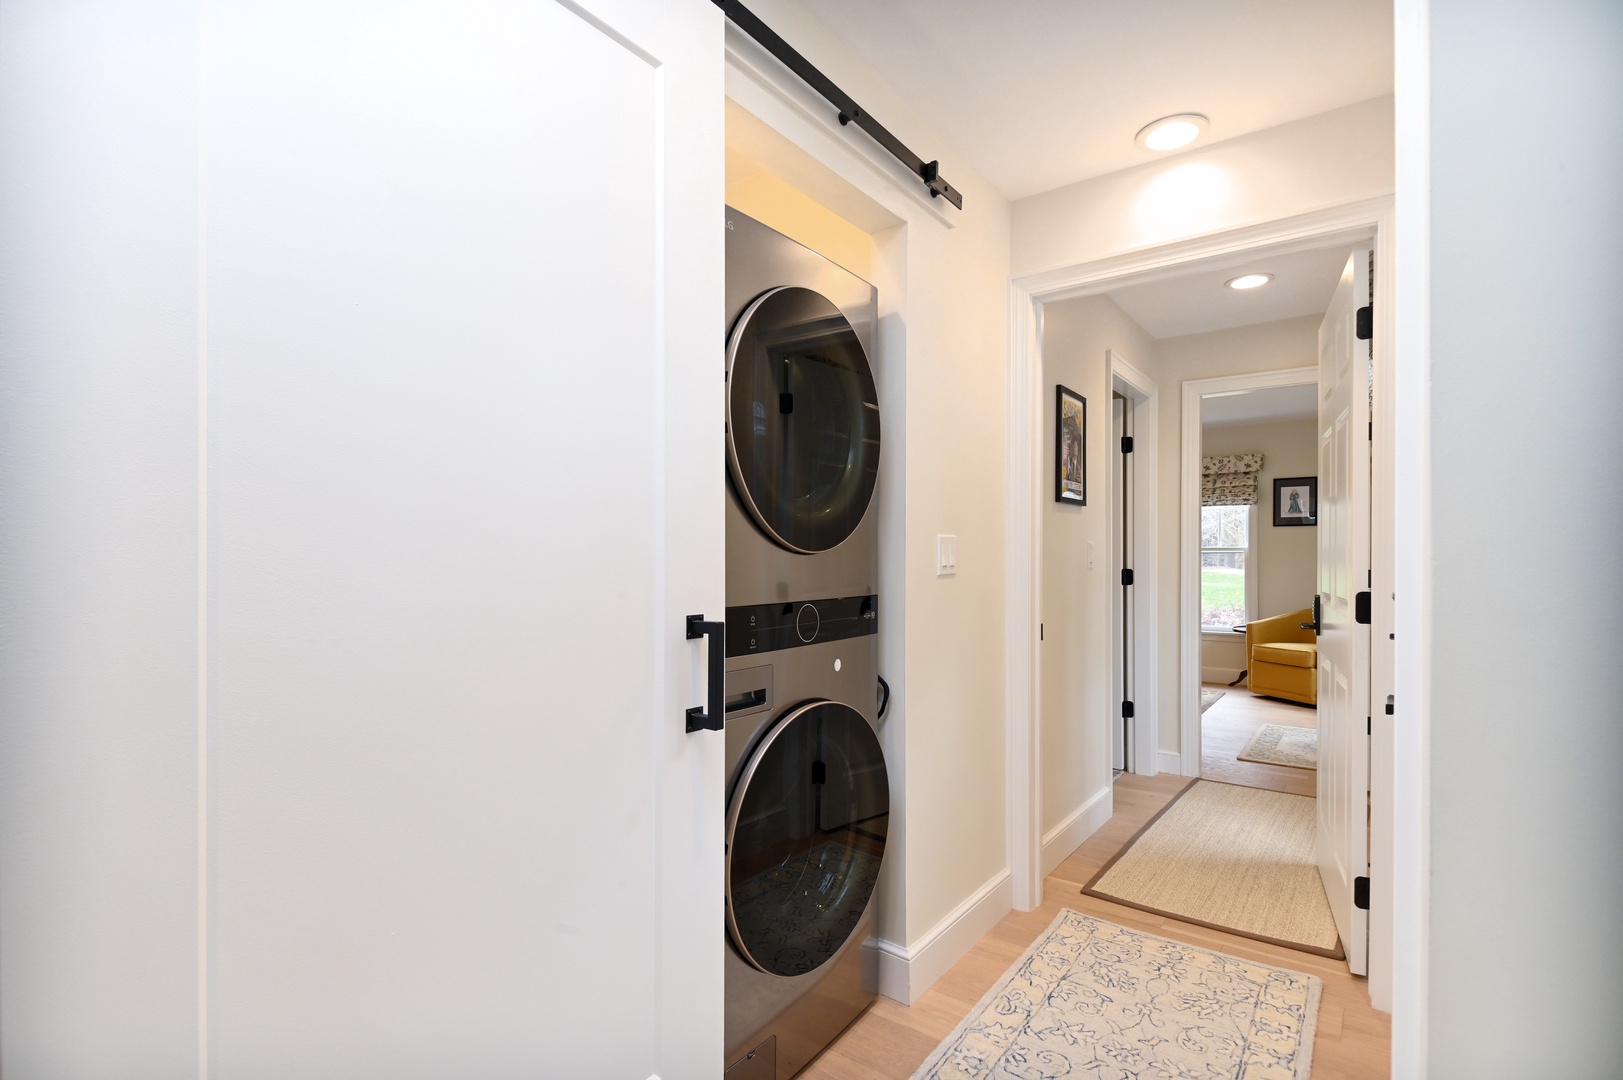 Shared laundry is available for your stay, tucked away in the entry hall